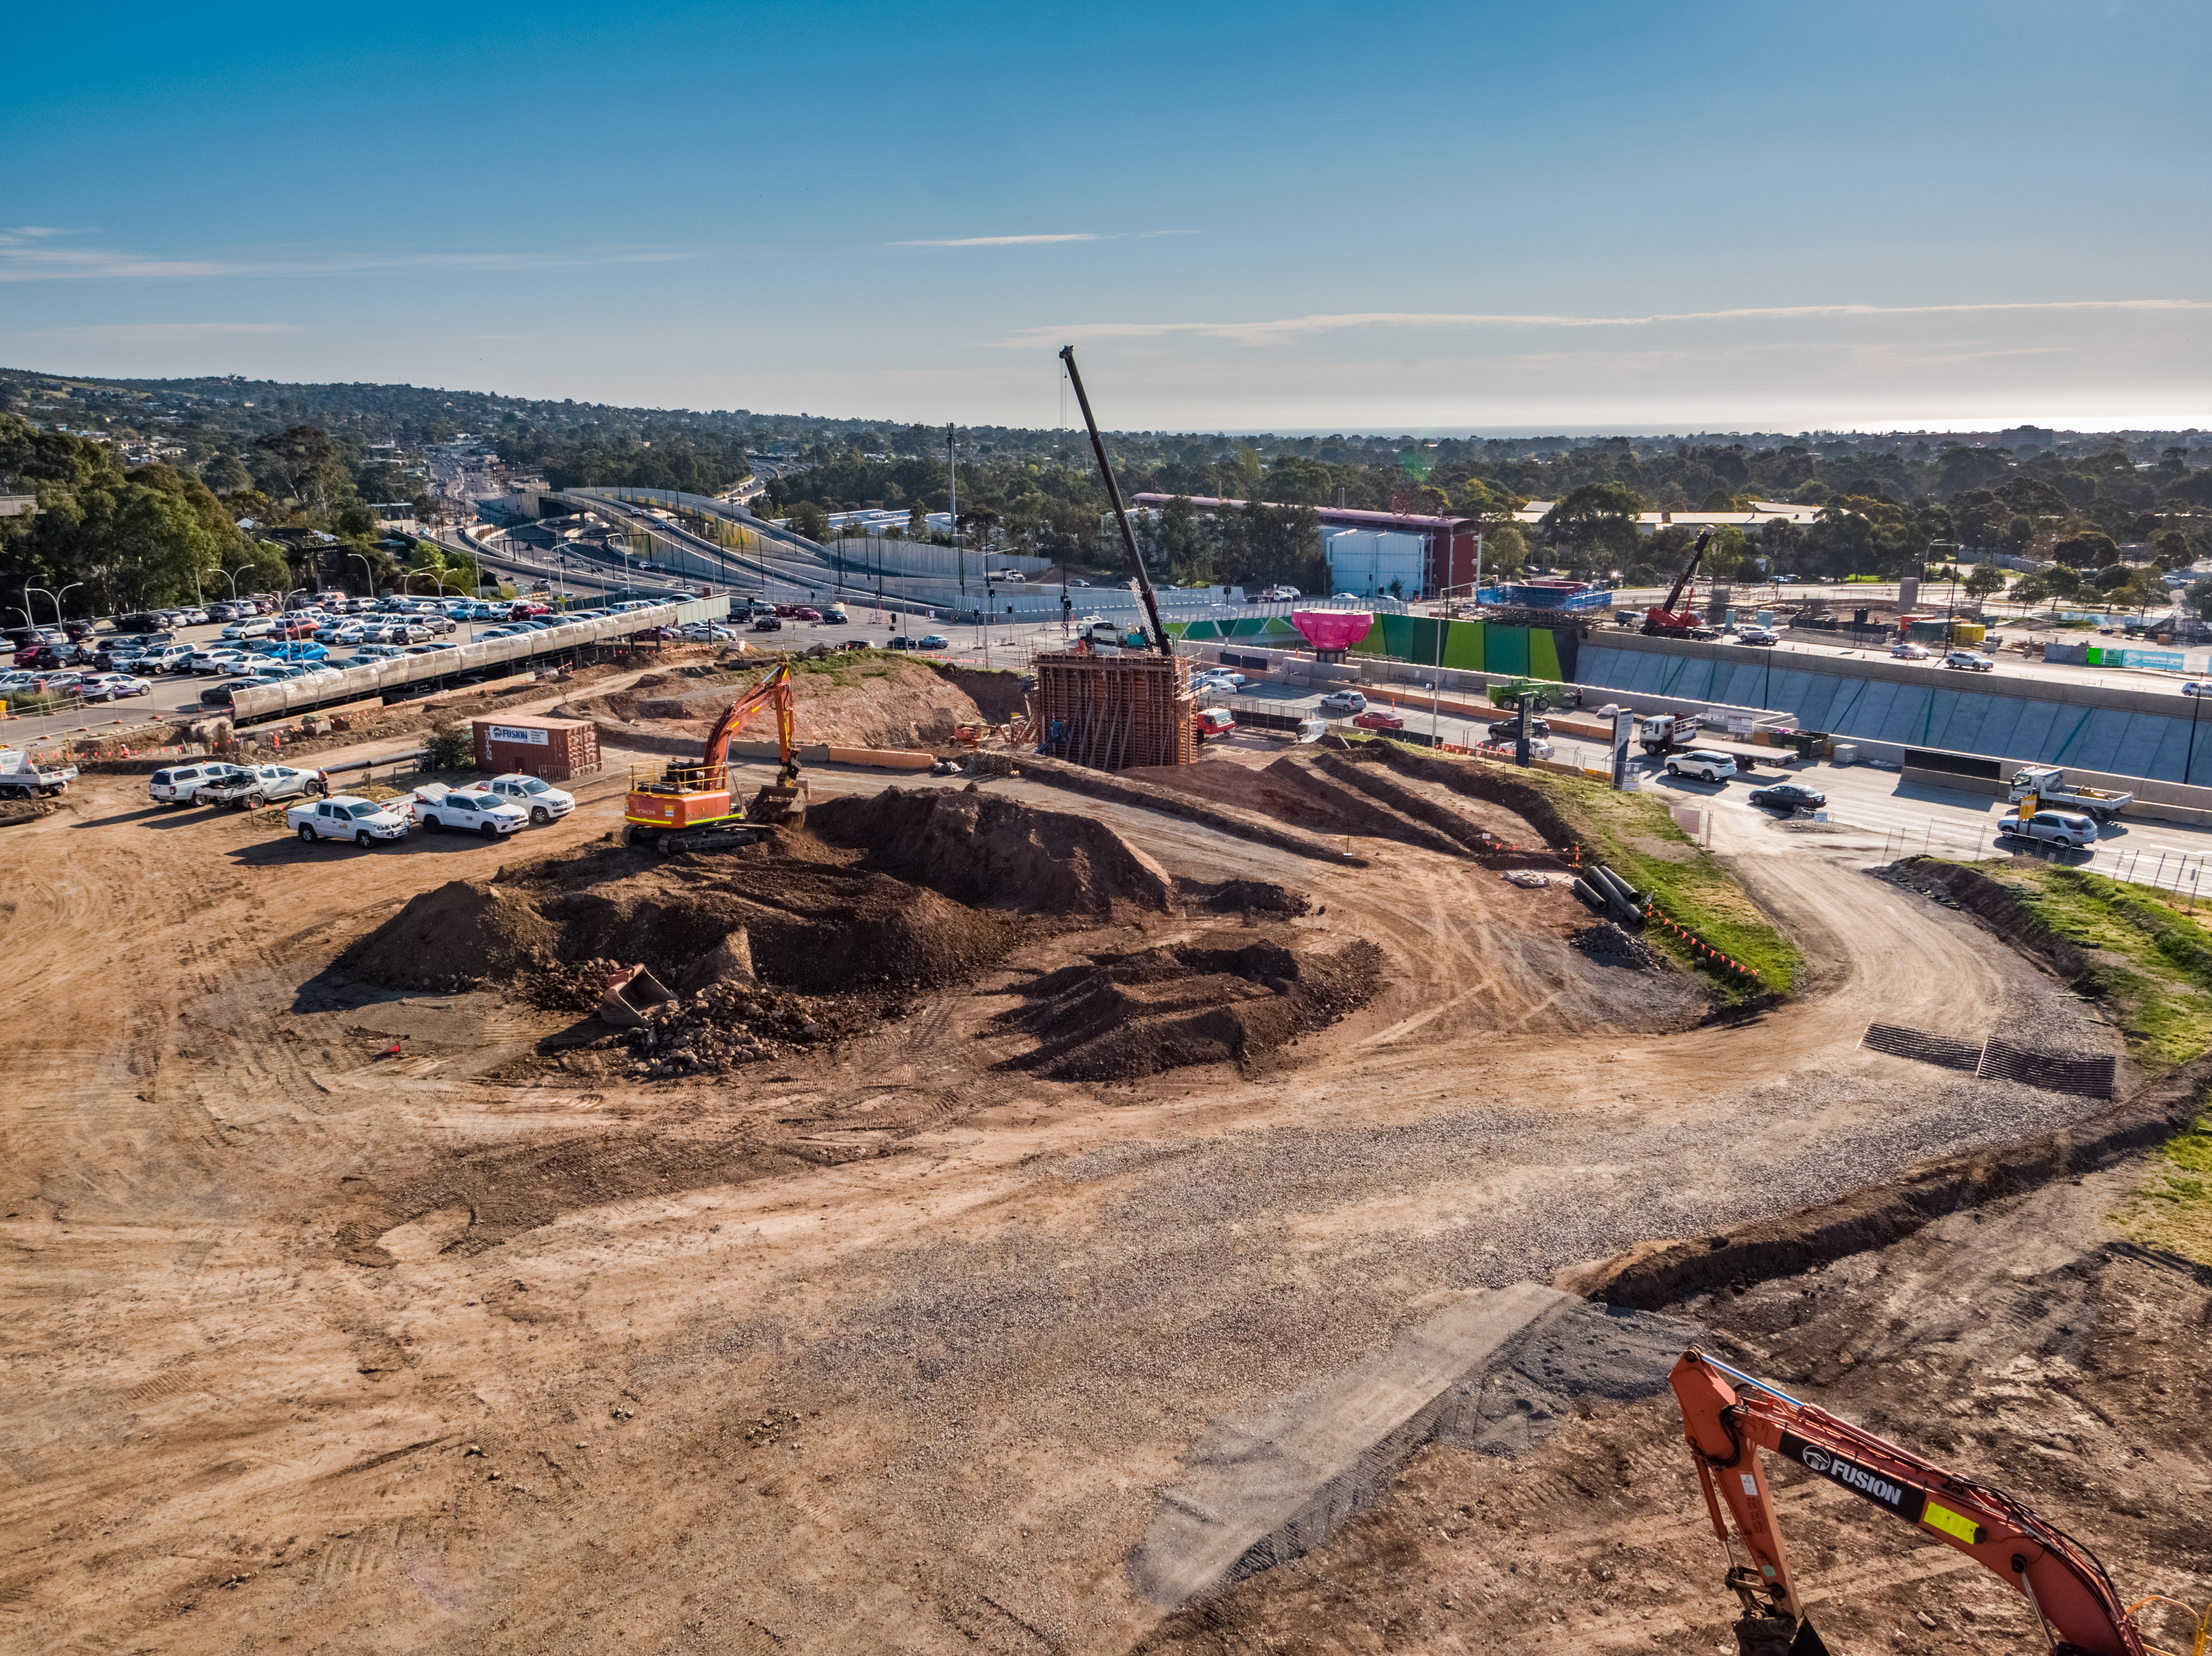 Earthworks are in the foreground, leading to a large structure, which is the first pier of the project. There is a crane behind it and other machinery, including an excavator in the foreground.